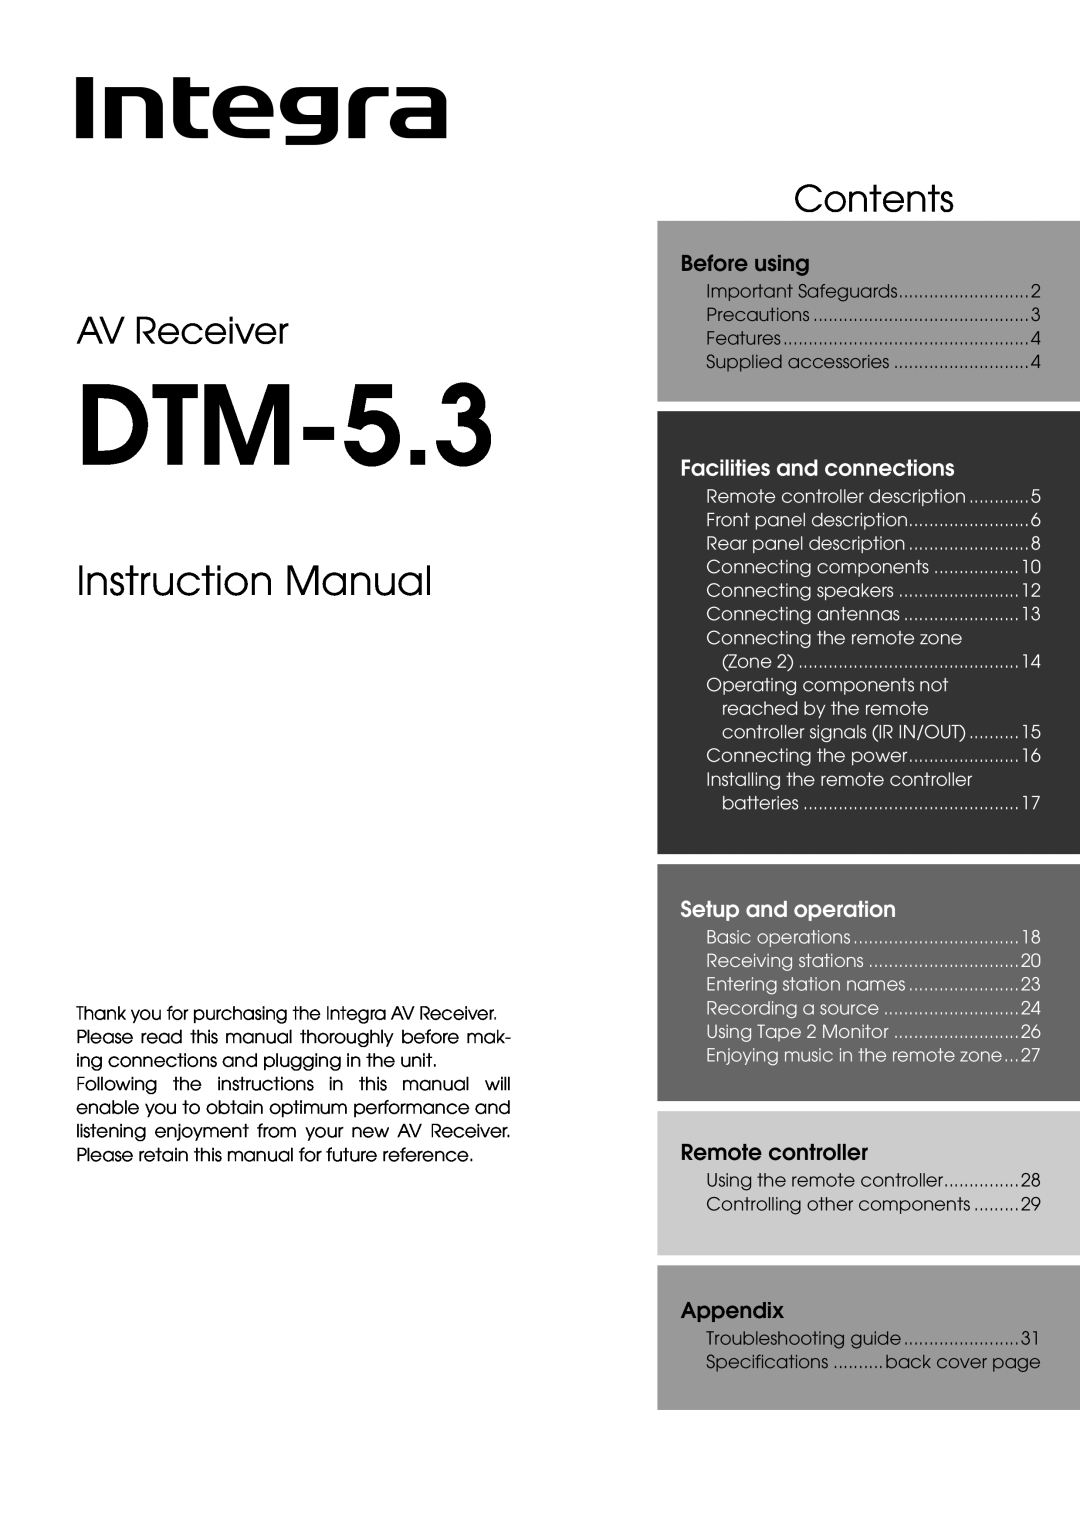 Integra DTM-5.3 appendix AV Receiver, Contents, Before using, Facilities and connections, Setup and operation, Appendix 